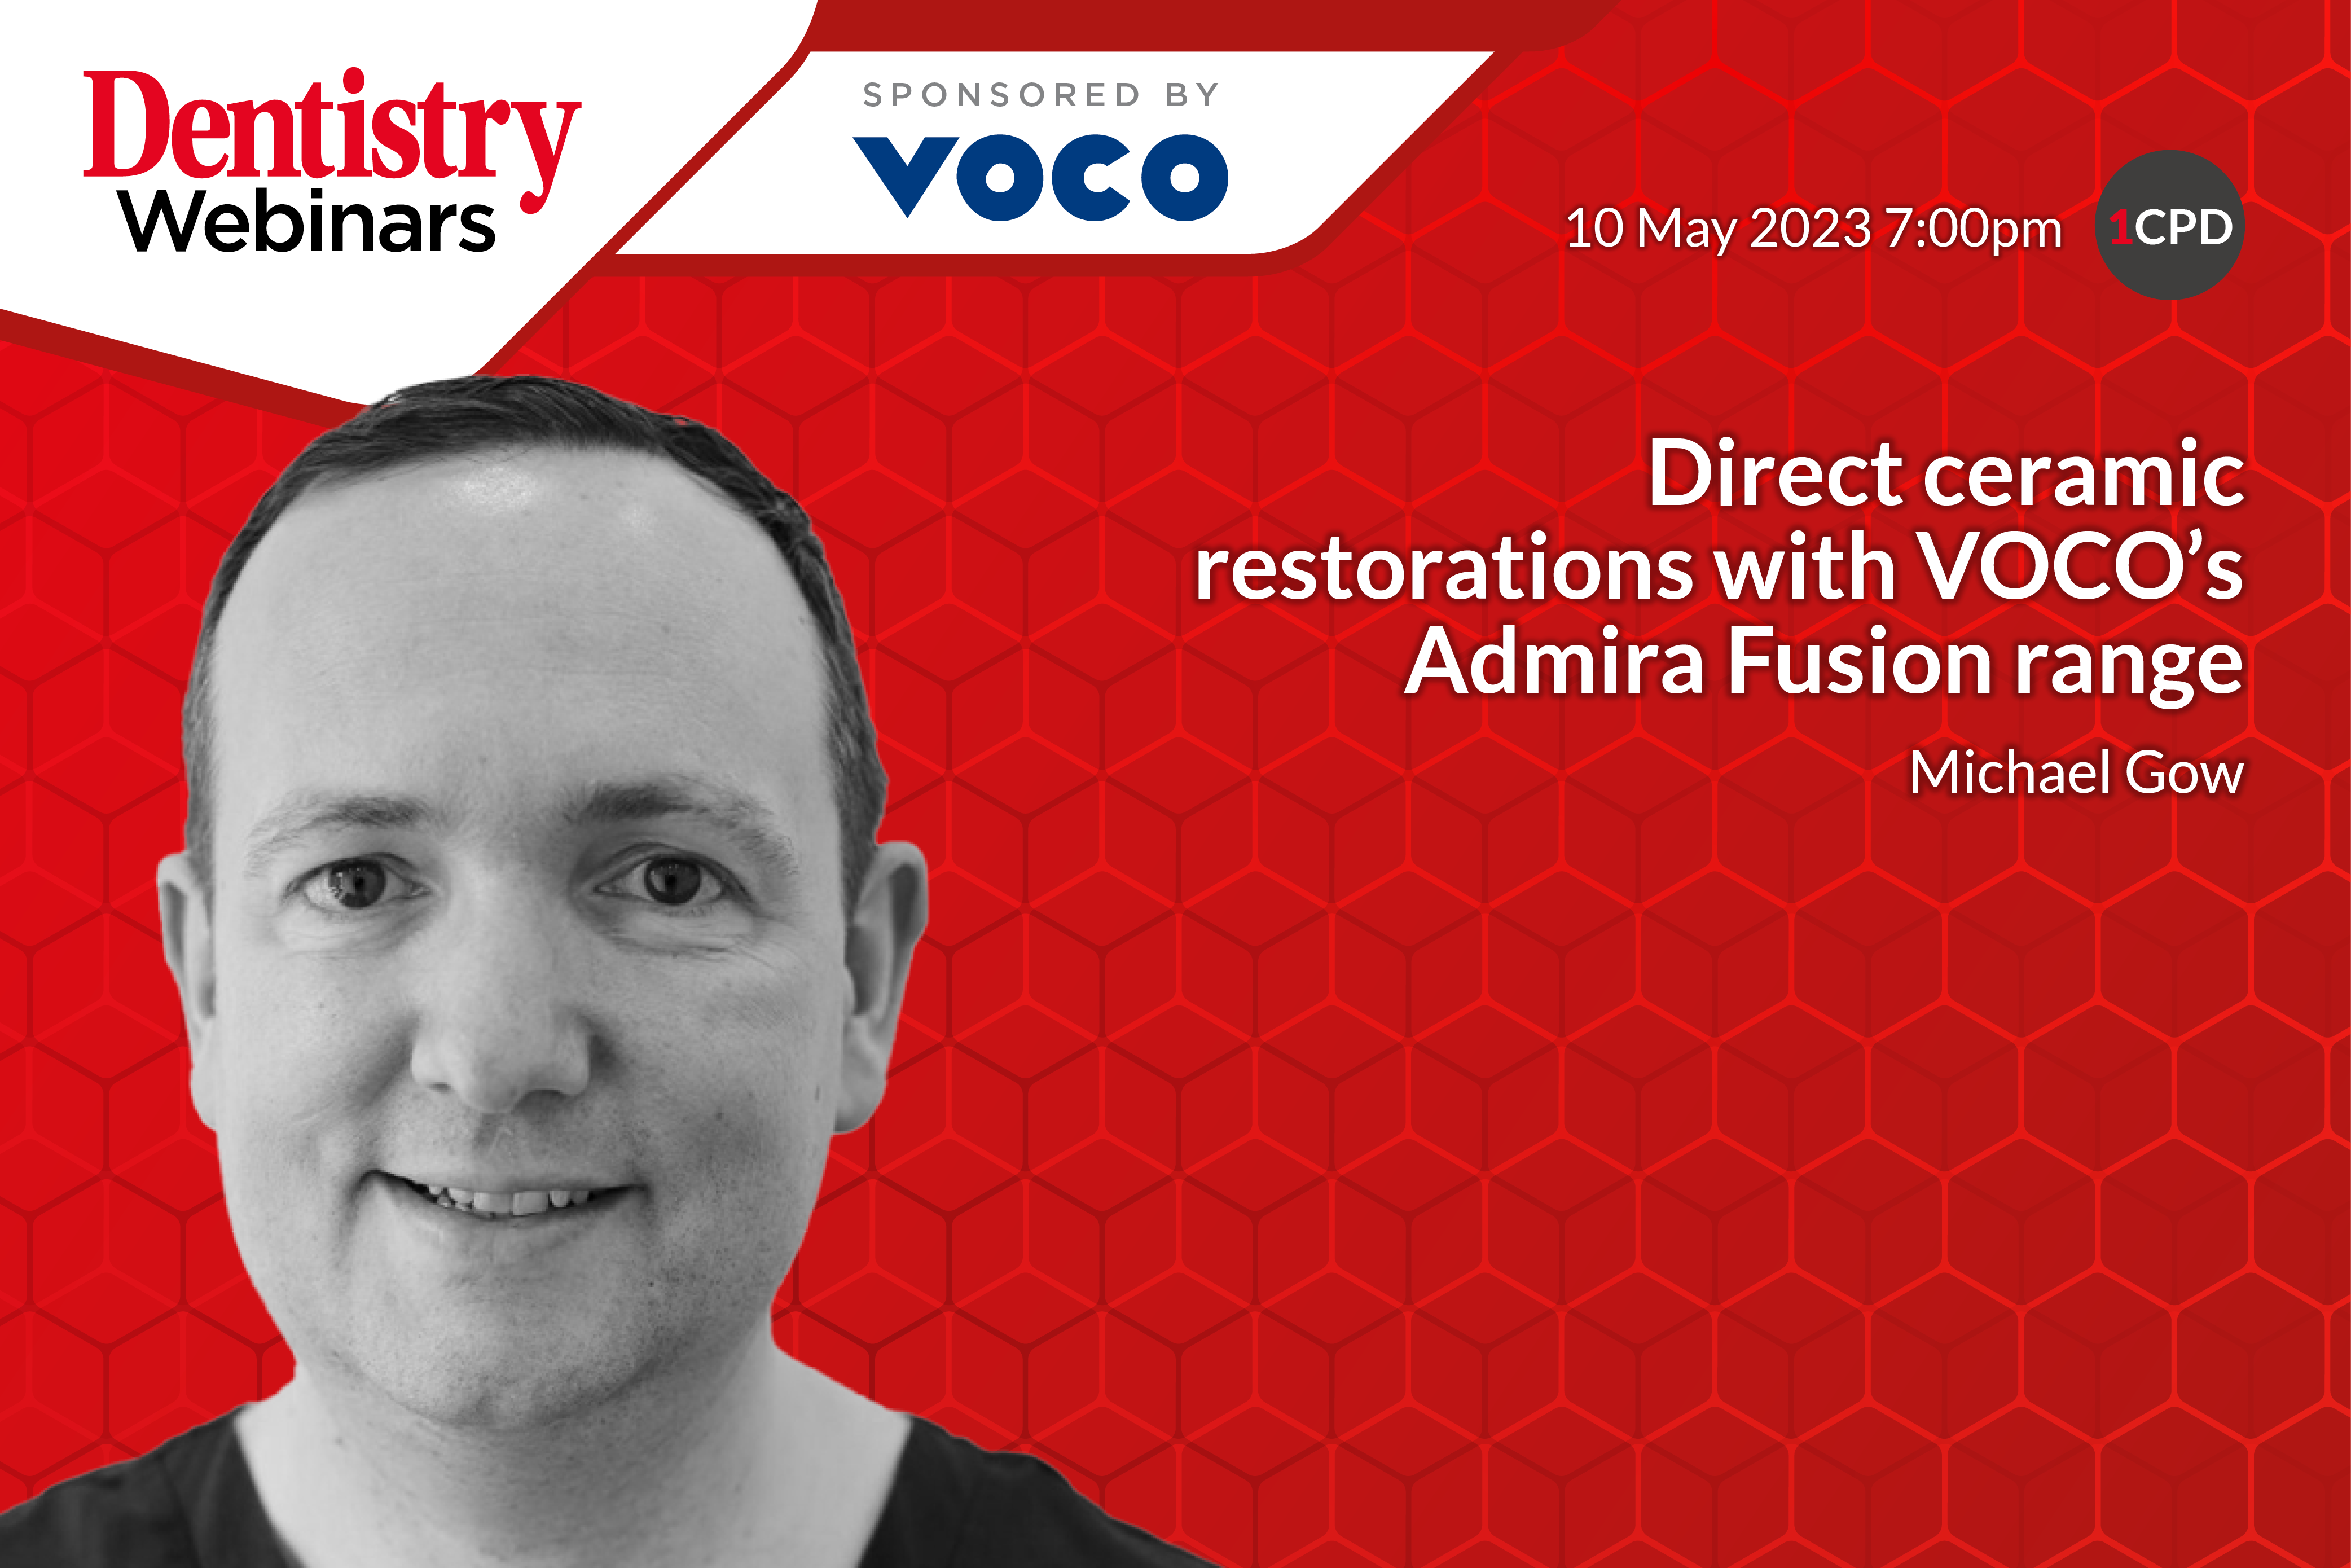 Join Michael Gow on Wednesday 10 May at 7pm as he discusses direct ceramic restorations with VOCO’s Admira Fusion range.